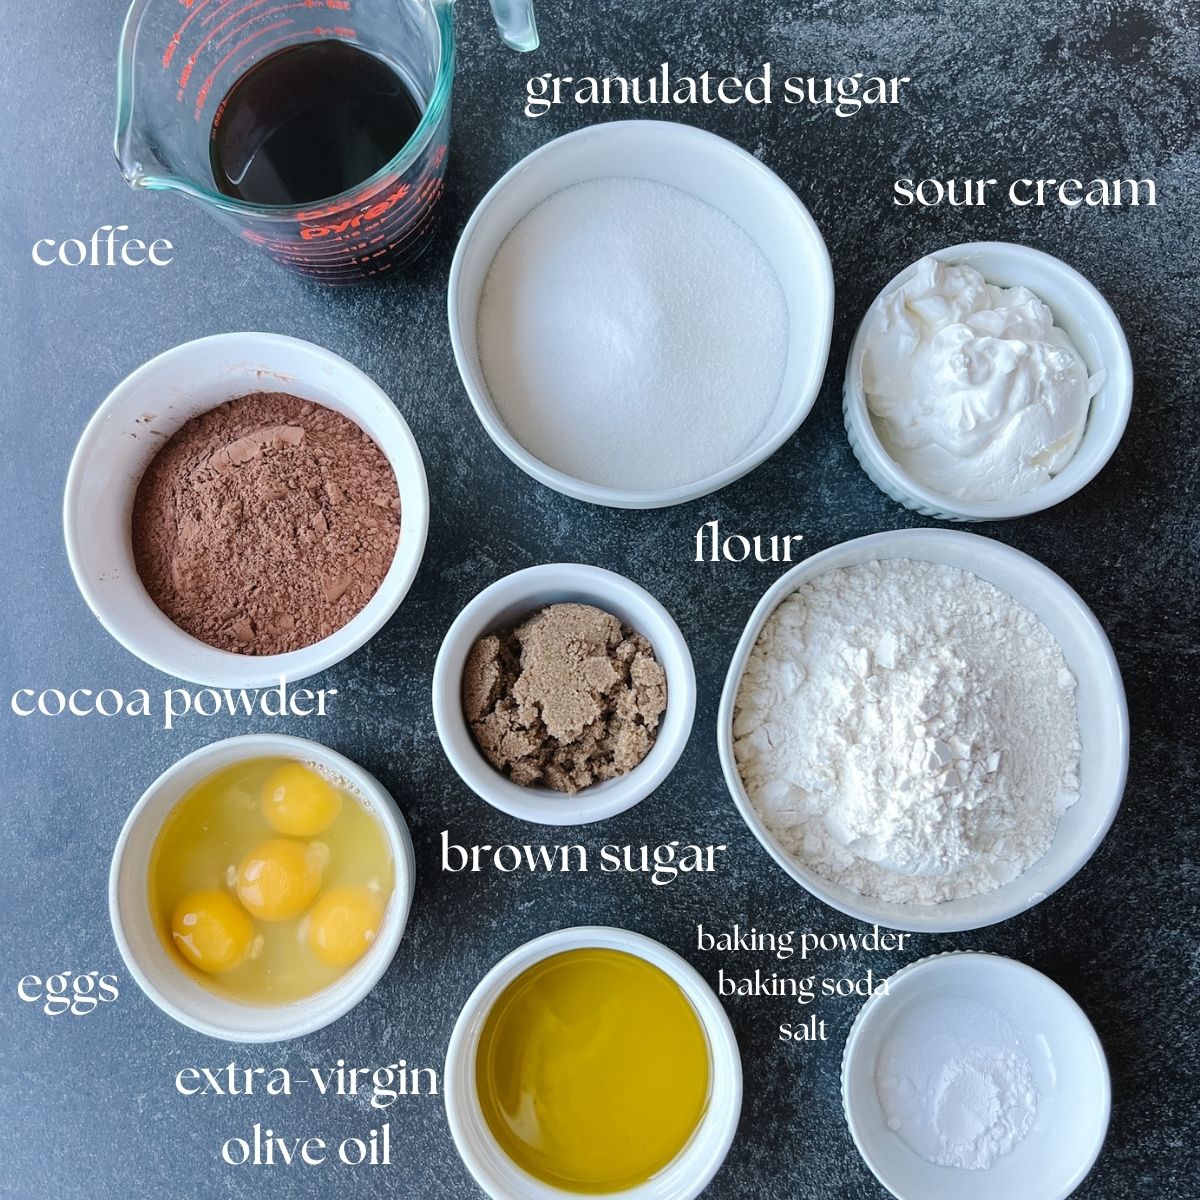 Ingredients shot for the chocolate pound cake. It includes: coffee, granulated sugar, sour cream, brown sugar, flour, cocoa powder, eggs, extra-virgin olive oil, baking powder, baking soda, and salt.